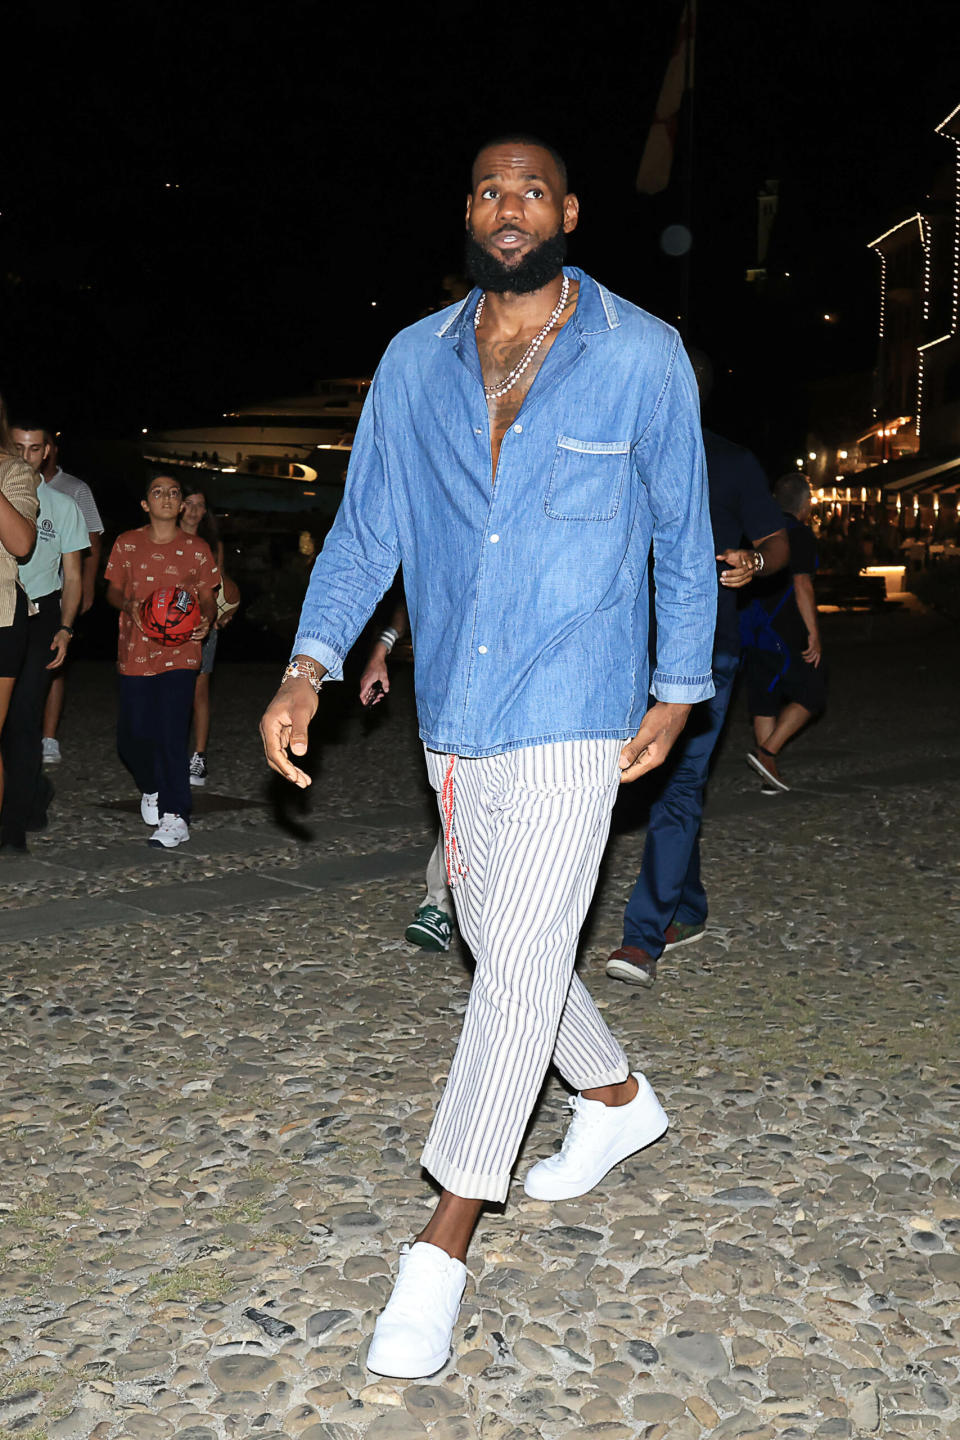 Lebron James spotted in Portofino with wife Savannah Brinson and some friends